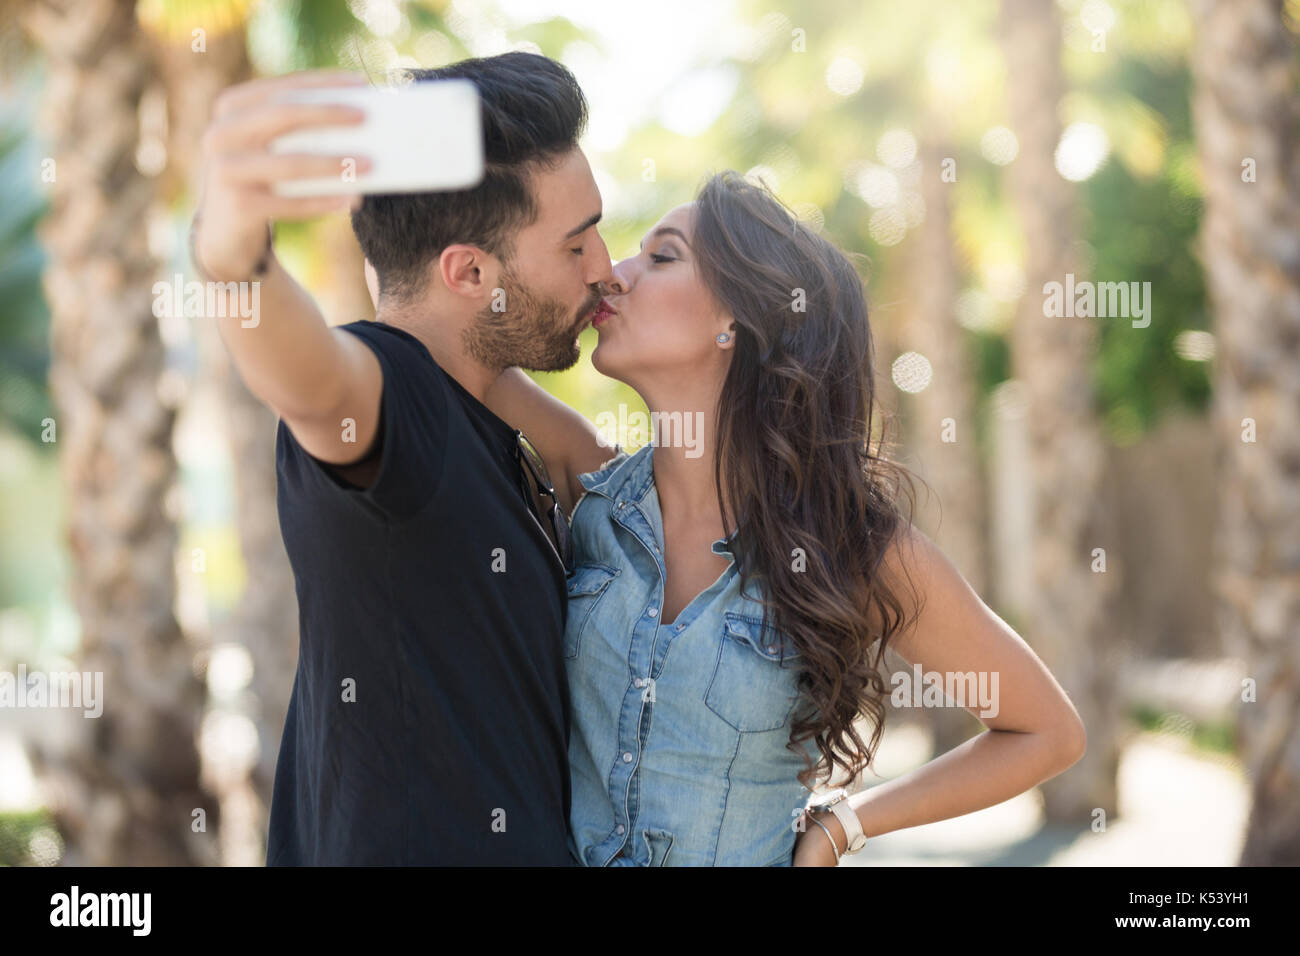 Romantic Couple Sitting on Stairs and Looking at Tablet Stock Photo - Image  of fashionable, handsome: 118309242